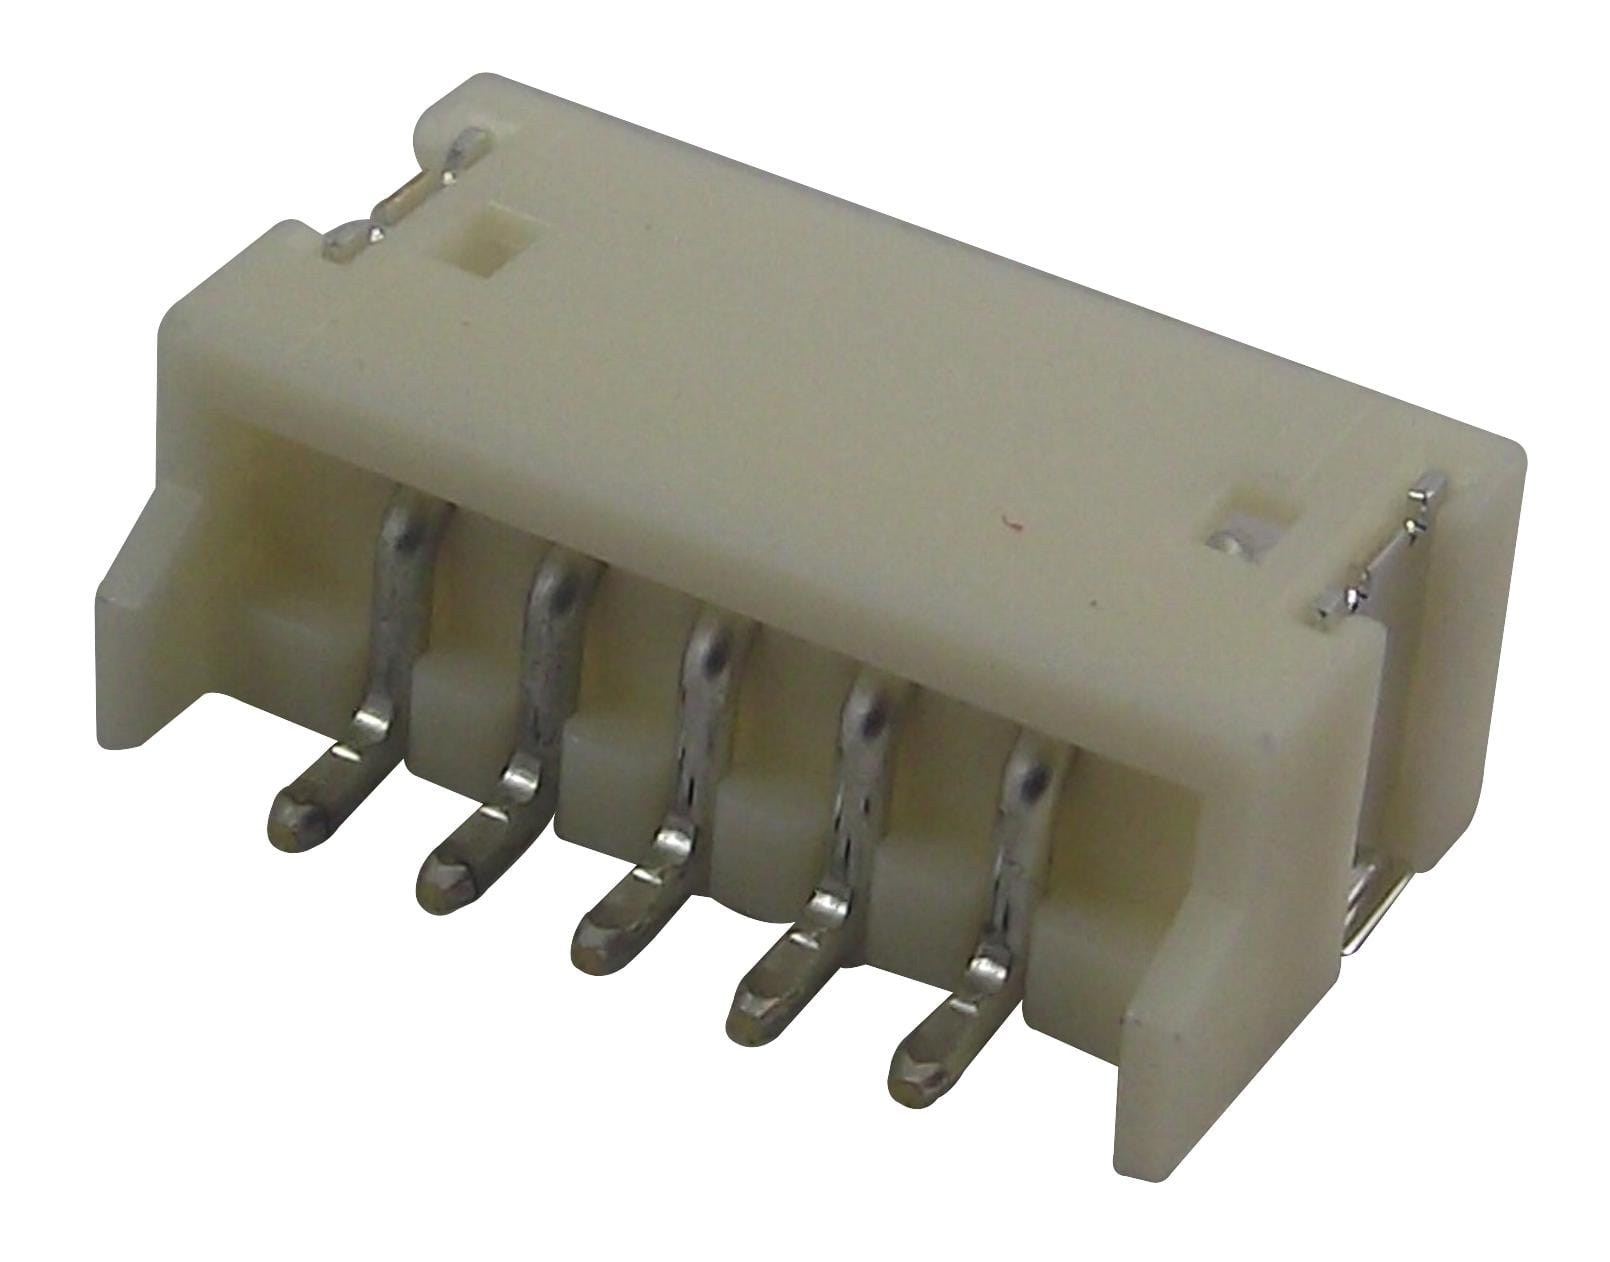 JST (JAPAN SOLDERLESS TERMINALS) Wire-to-Board S5B-ZR-SM4A-TF(LF)(SN) CONNECTOR, HEADER, 5POS, 1.5MM, 1ROW JST (JAPAN SOLDERLESS TERMINALS) 2399479 S5B-ZR-SM4A-TF(LF)(SN)